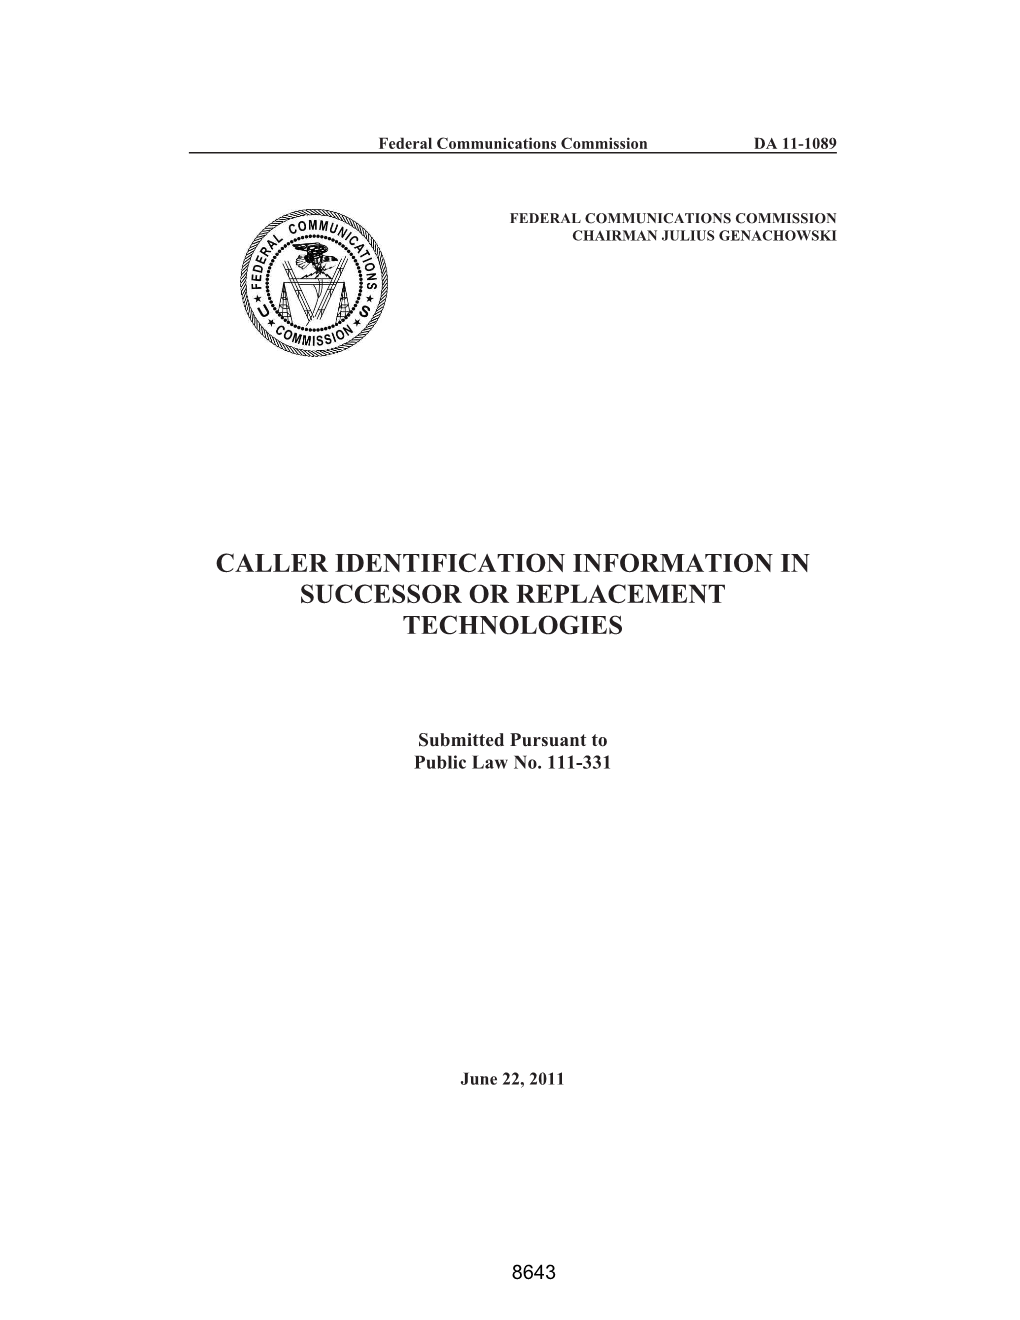 Caller Identification Information in Successor Or Replacement Technologies